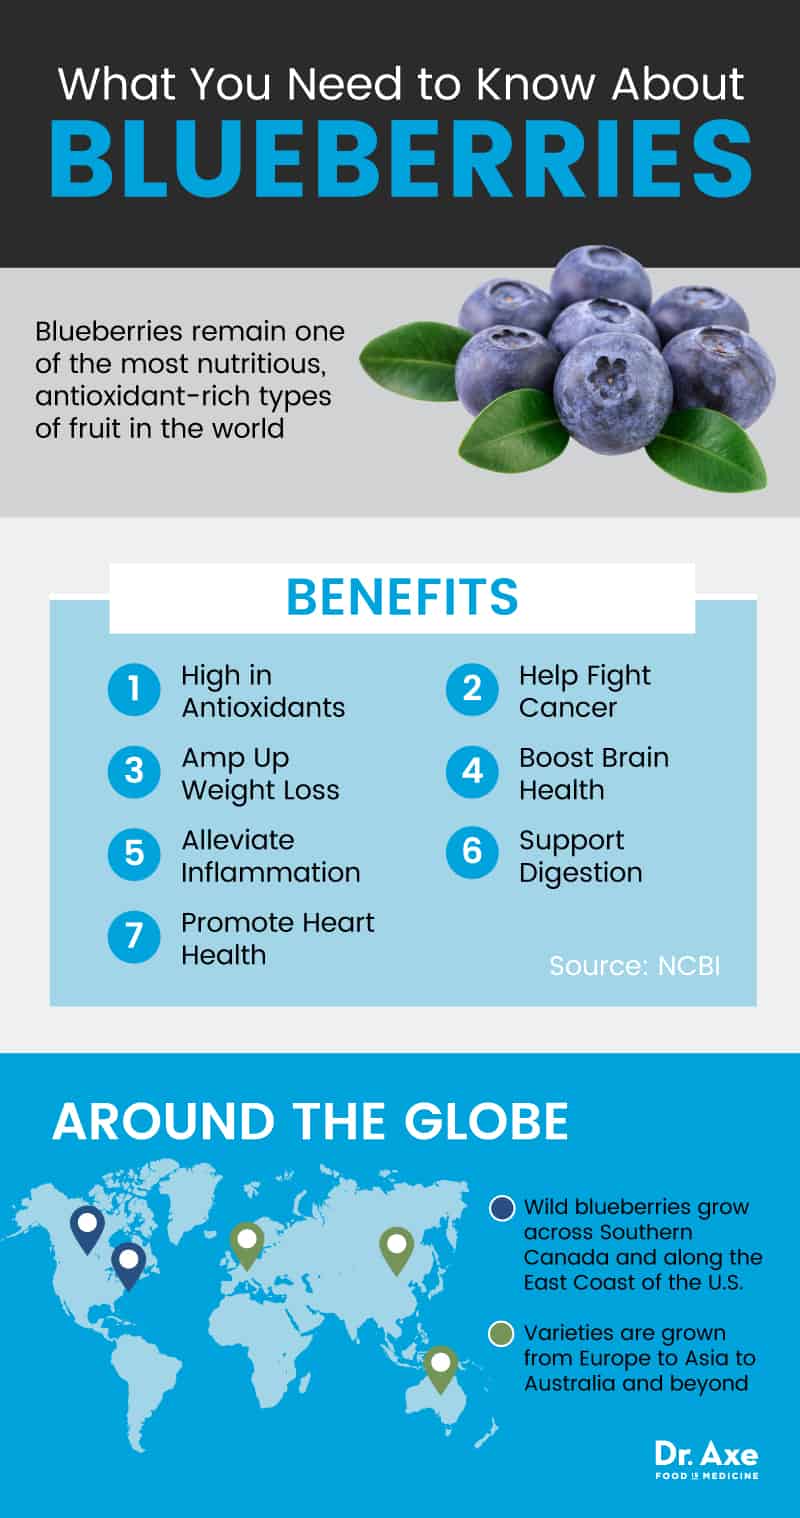 Health benefits of blueberries - Dr. Axe